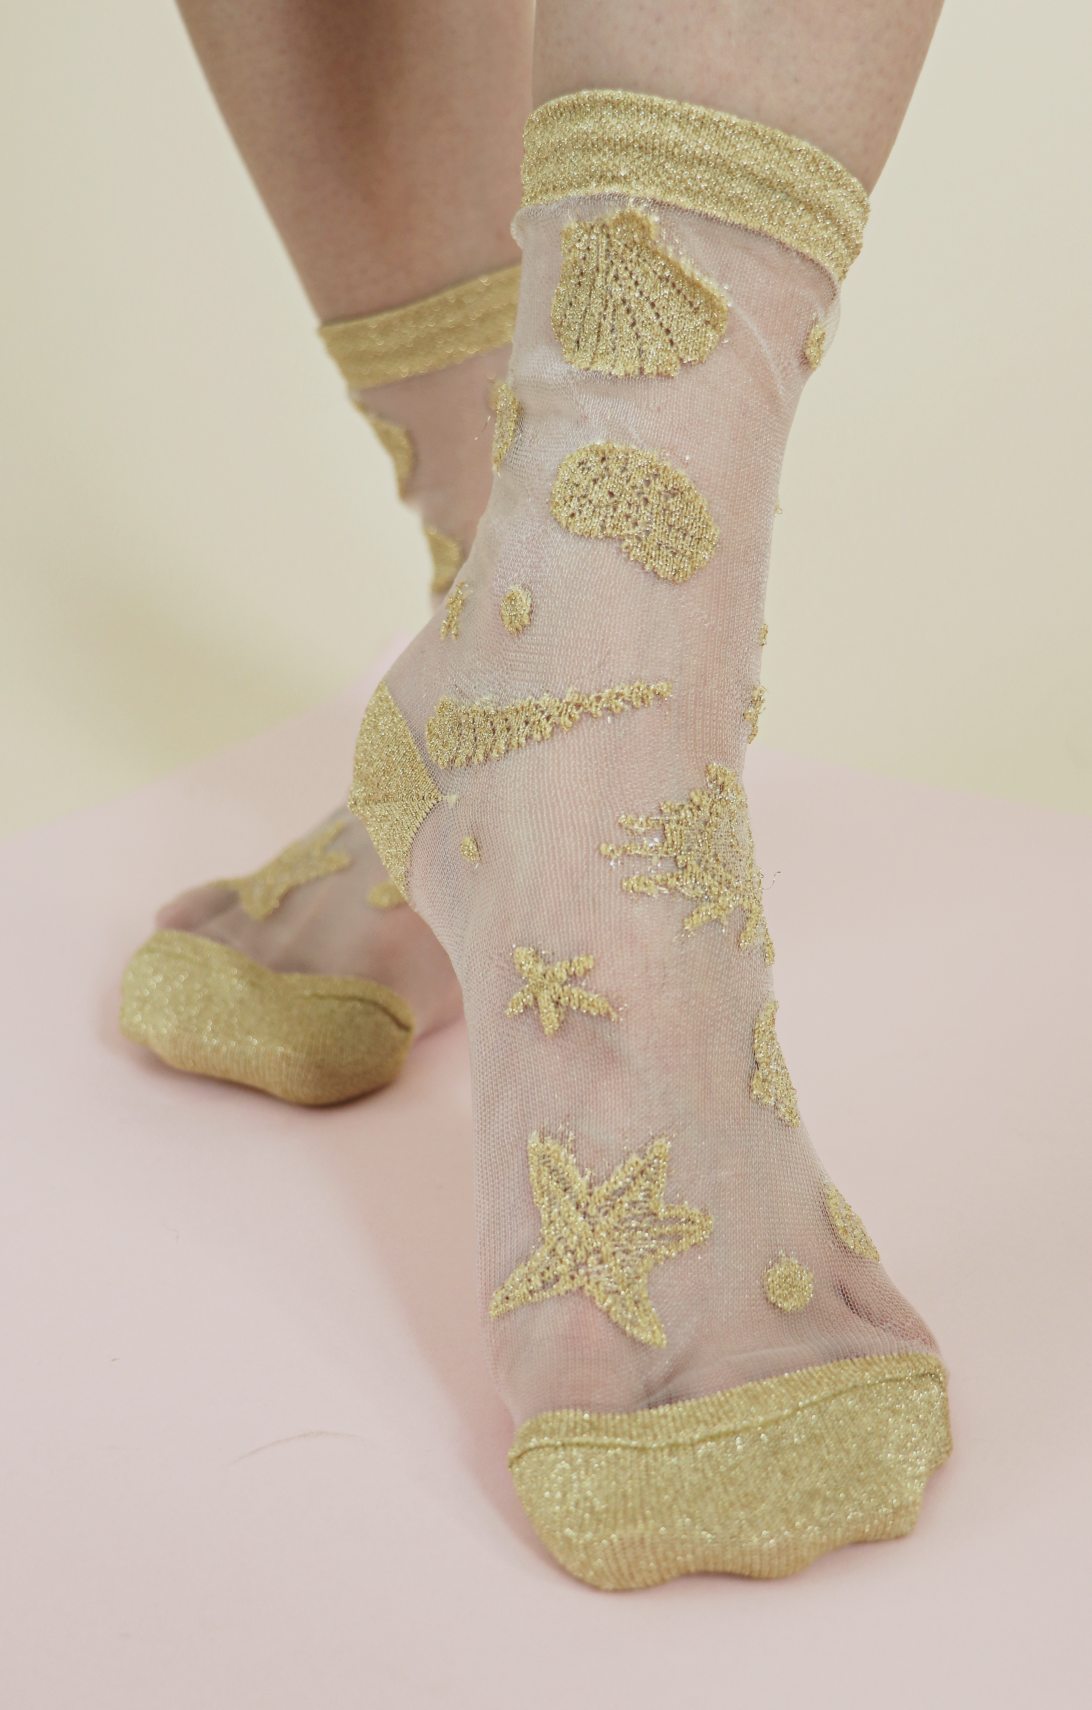 TABBISOCKS brand Shimmery Clear Seashell Socks in CLEAR GOLD color with gold-colored seashell and starfish embroidery scattered on transparent white fabric.